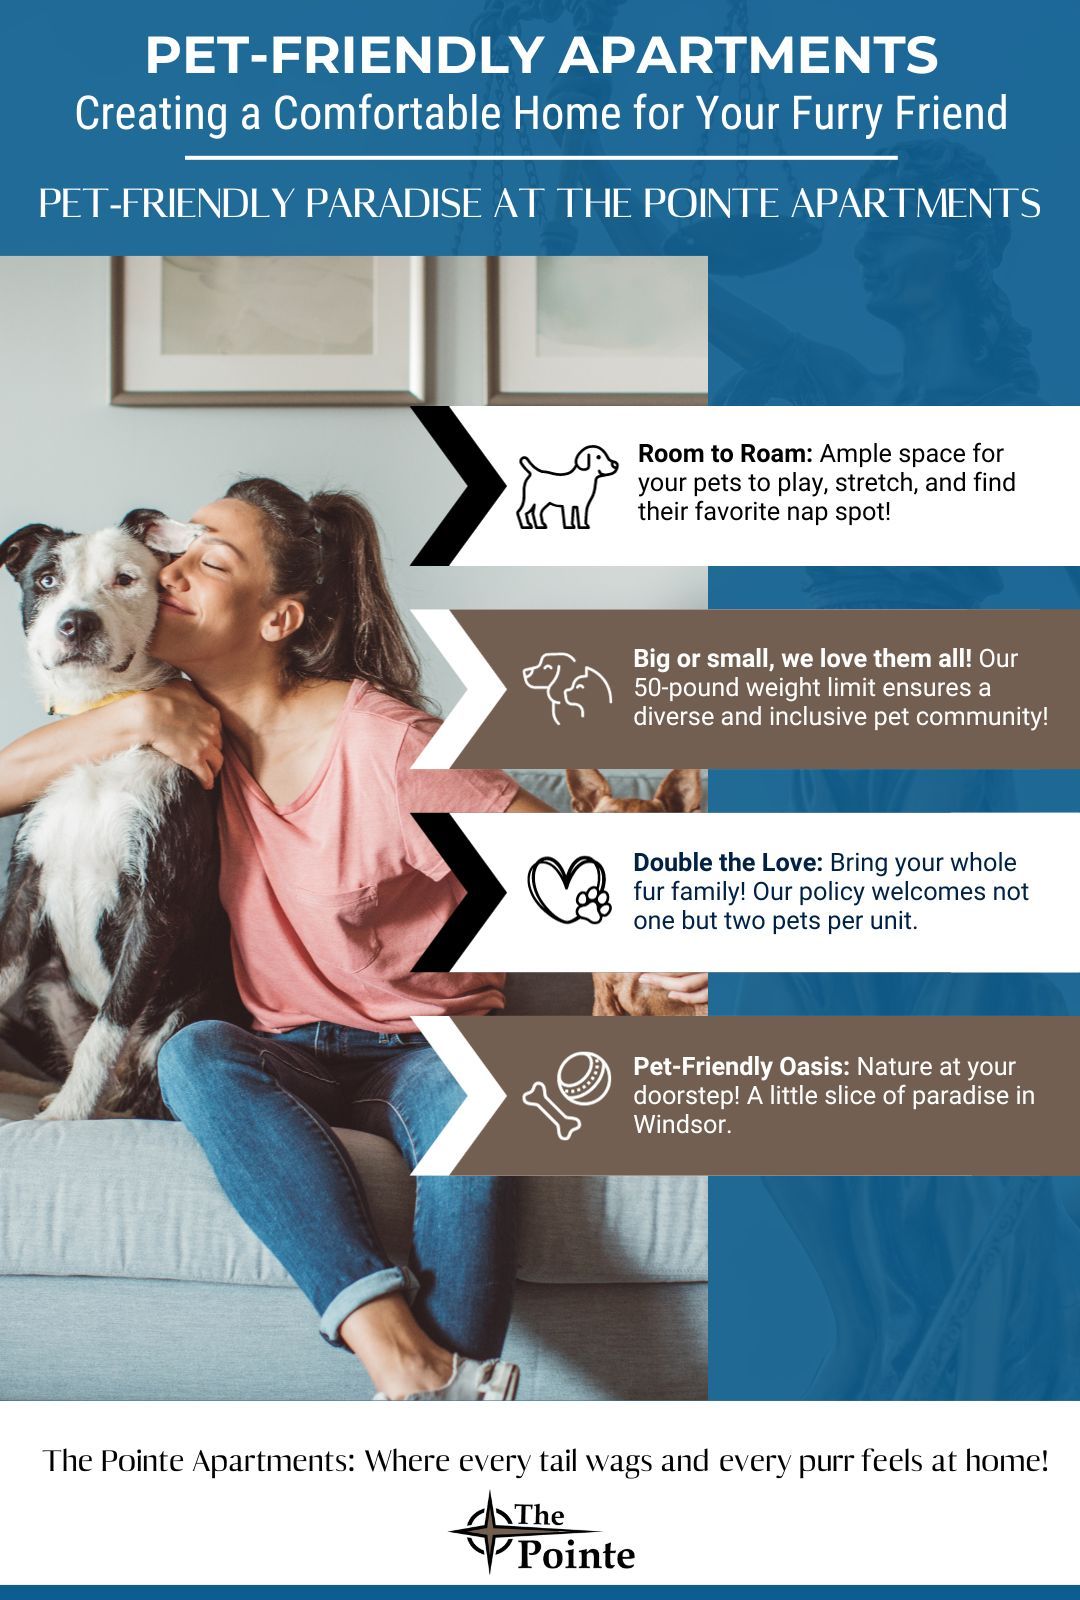 M38716 - The Pointe Apartments - Infographic - Pet-Friendly Apartments.jpg